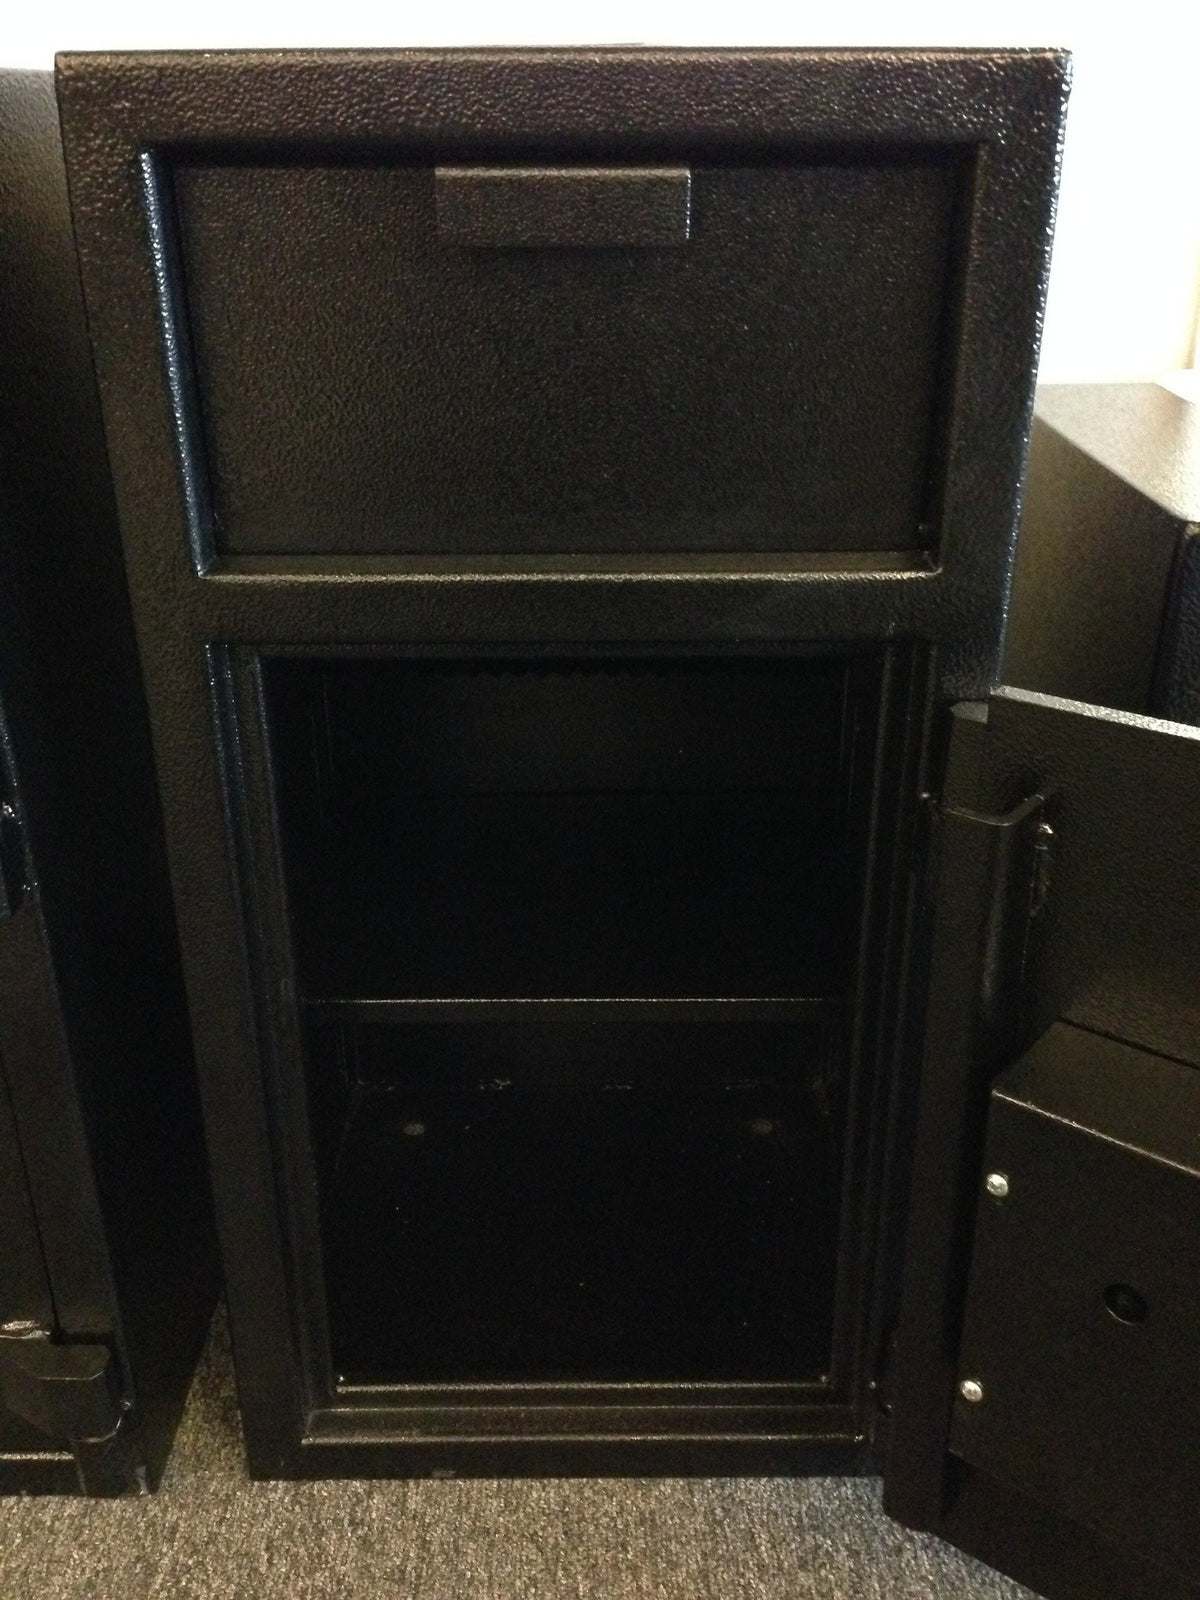 SafeandVaultStore FLH271414 B-Rated Depository Safe